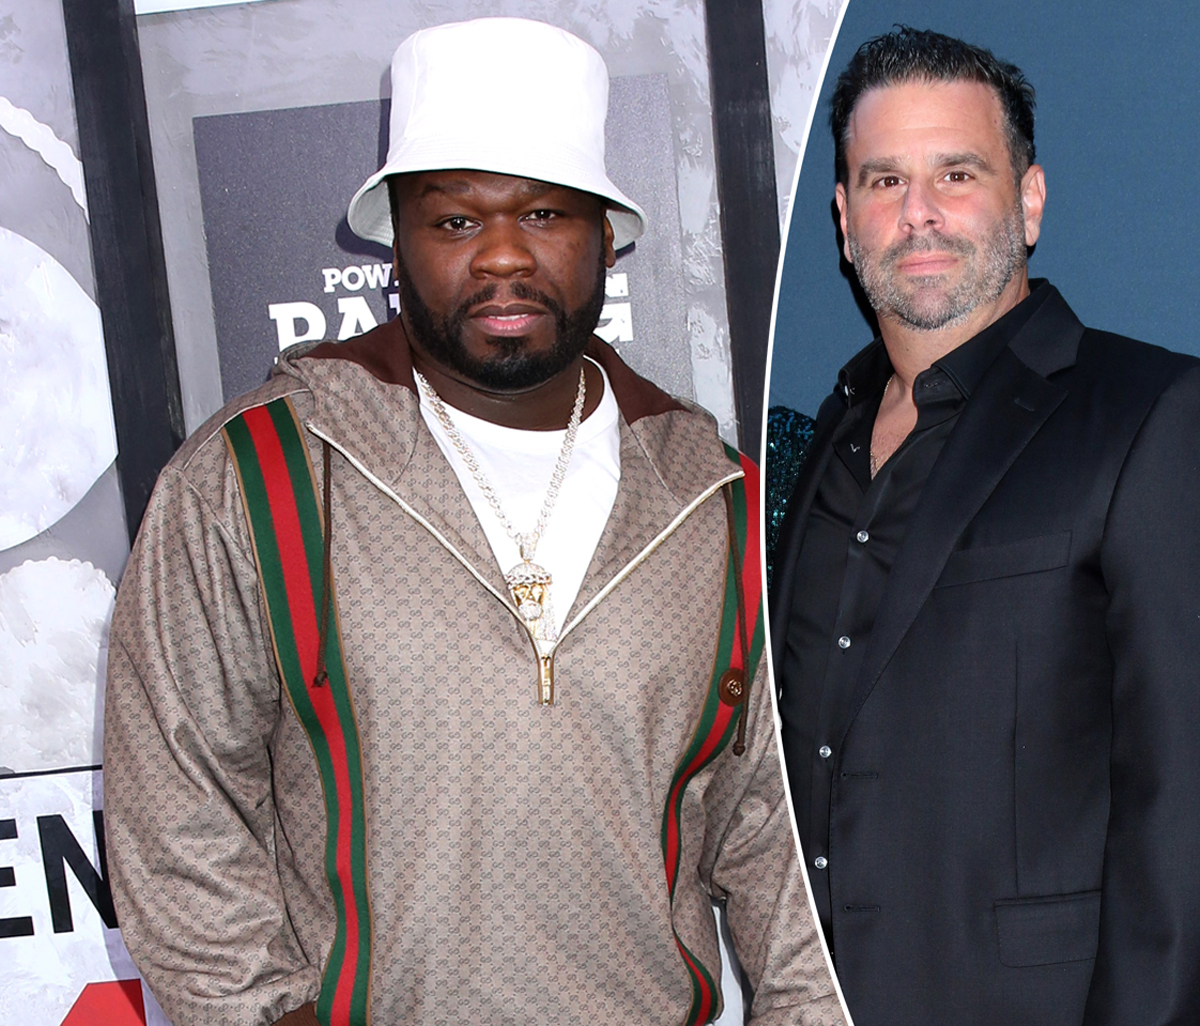 #50 Cent Reacts To Randall Emmett’s Sexual Misconduct Allegations After Previous Feud